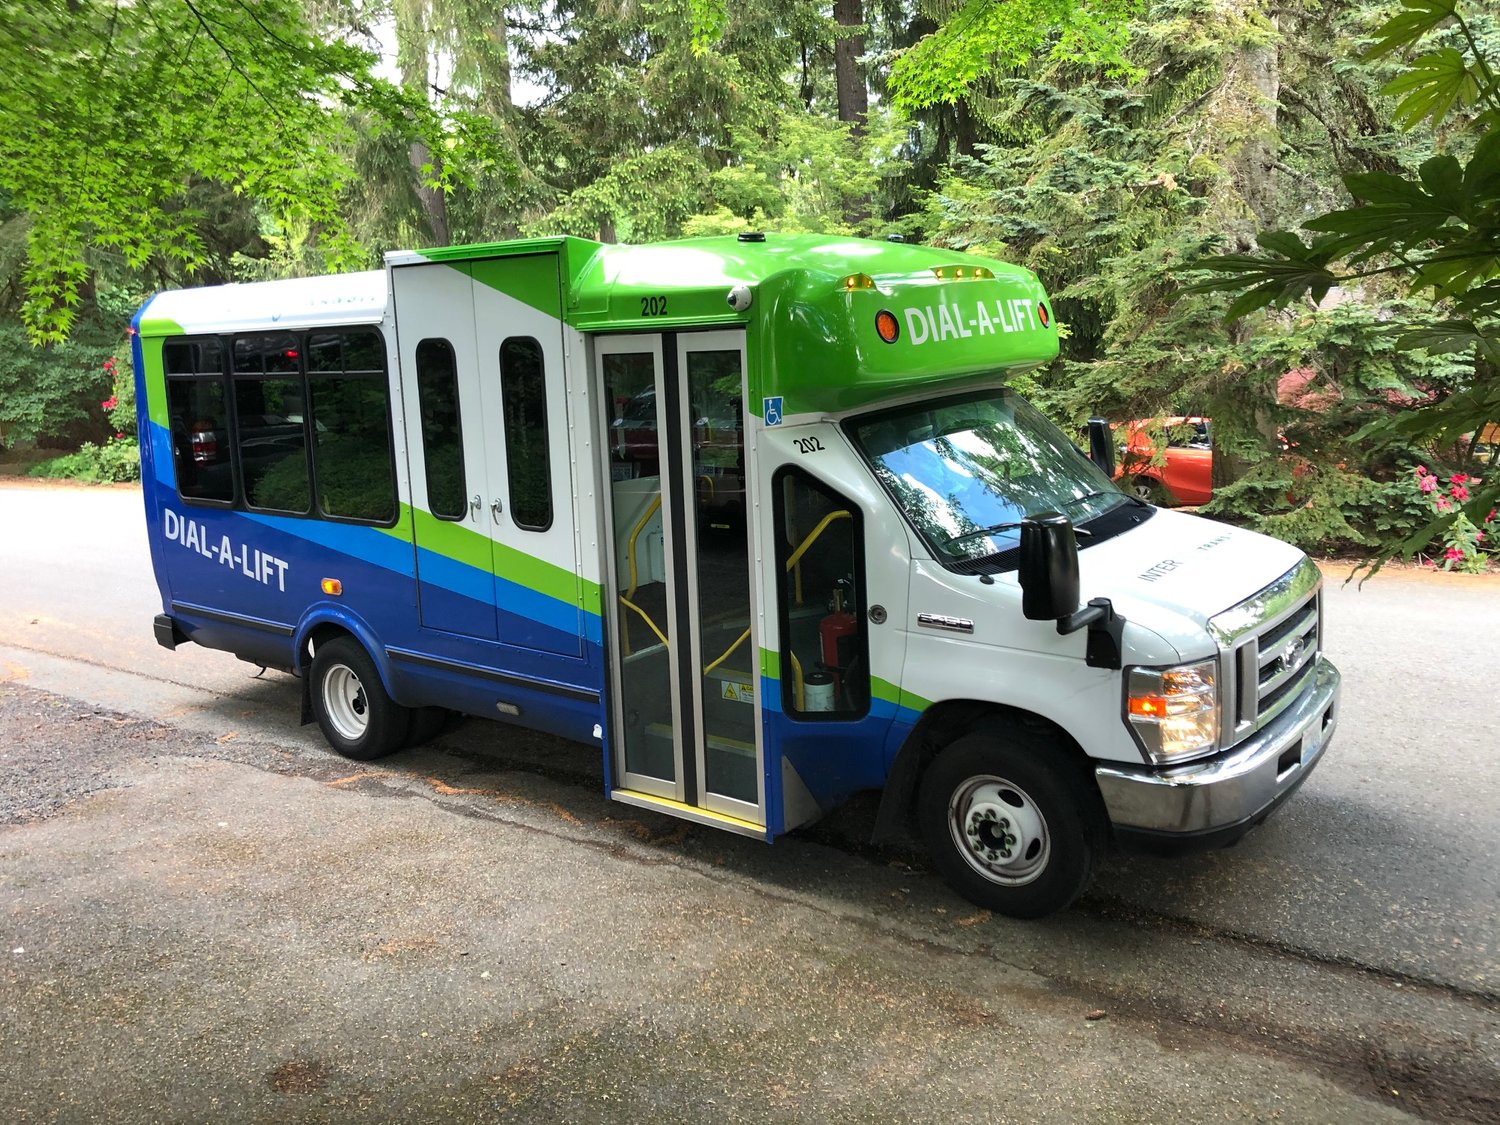 This is one of Intercity Transit's newer Dial-A-Lift buses, shown arriving at a rider's home.